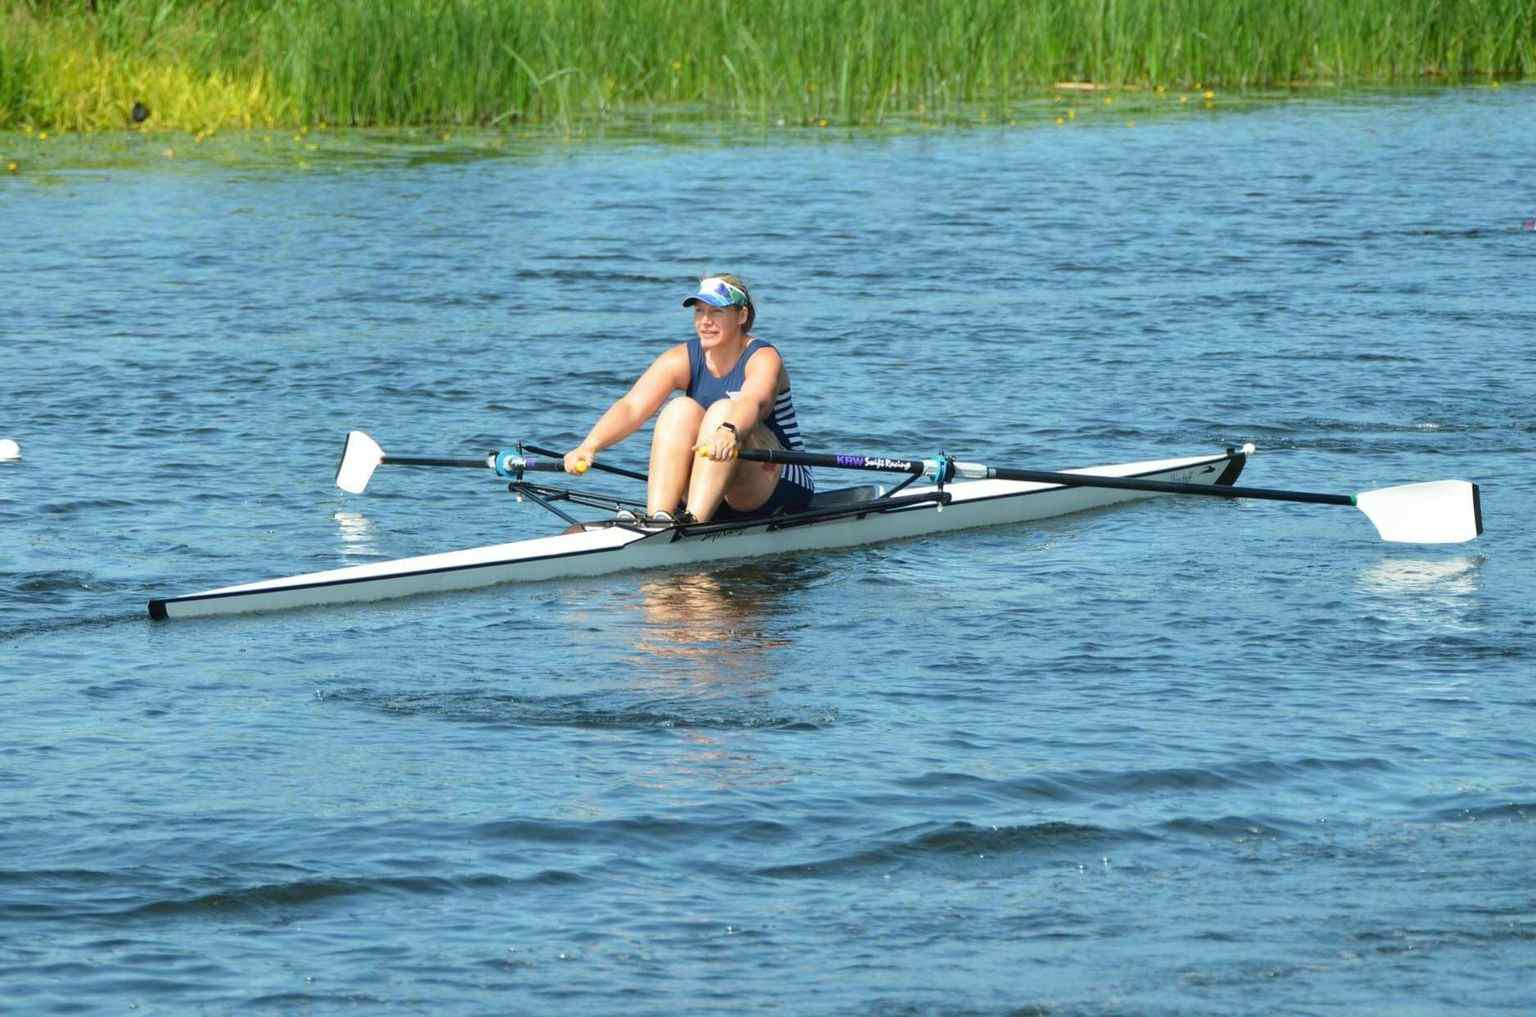 Winning Sudbury single sculler, Kate Wallace, sculling to victory at St Ives. 